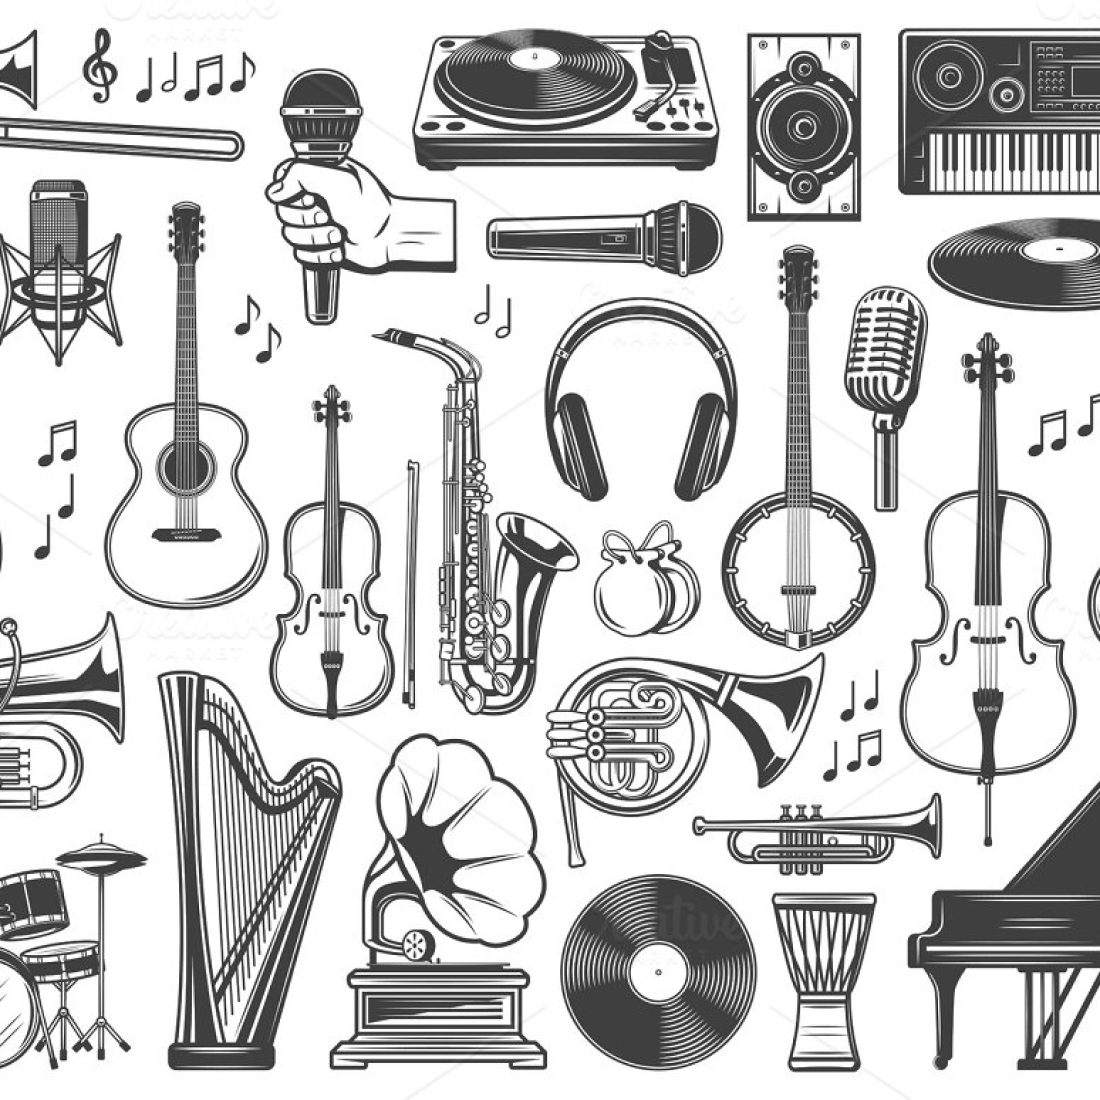 Musical instruments, sound equipment cover.